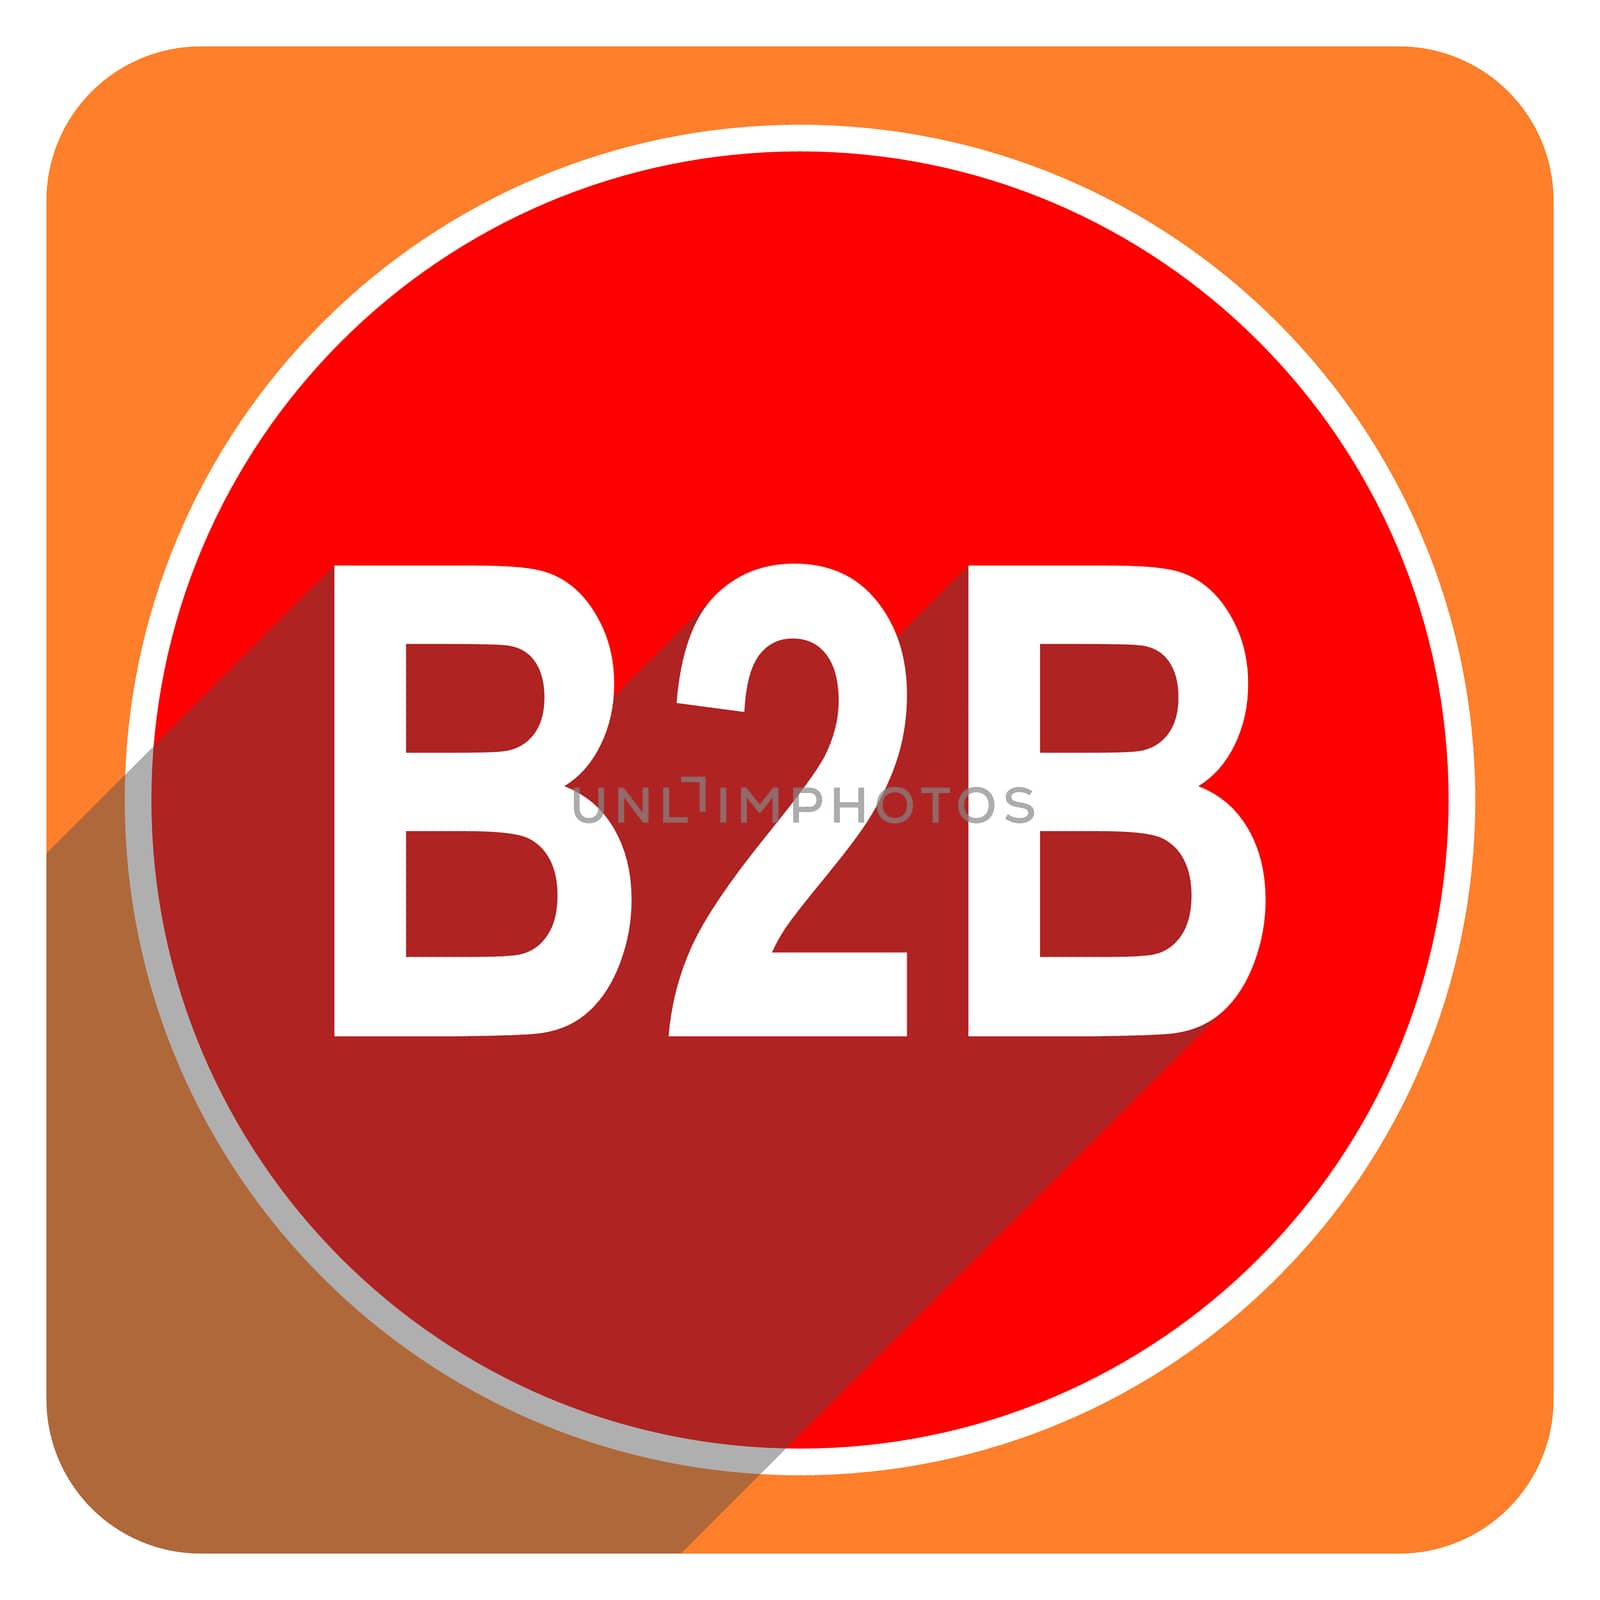 b2b red flat icon isolated